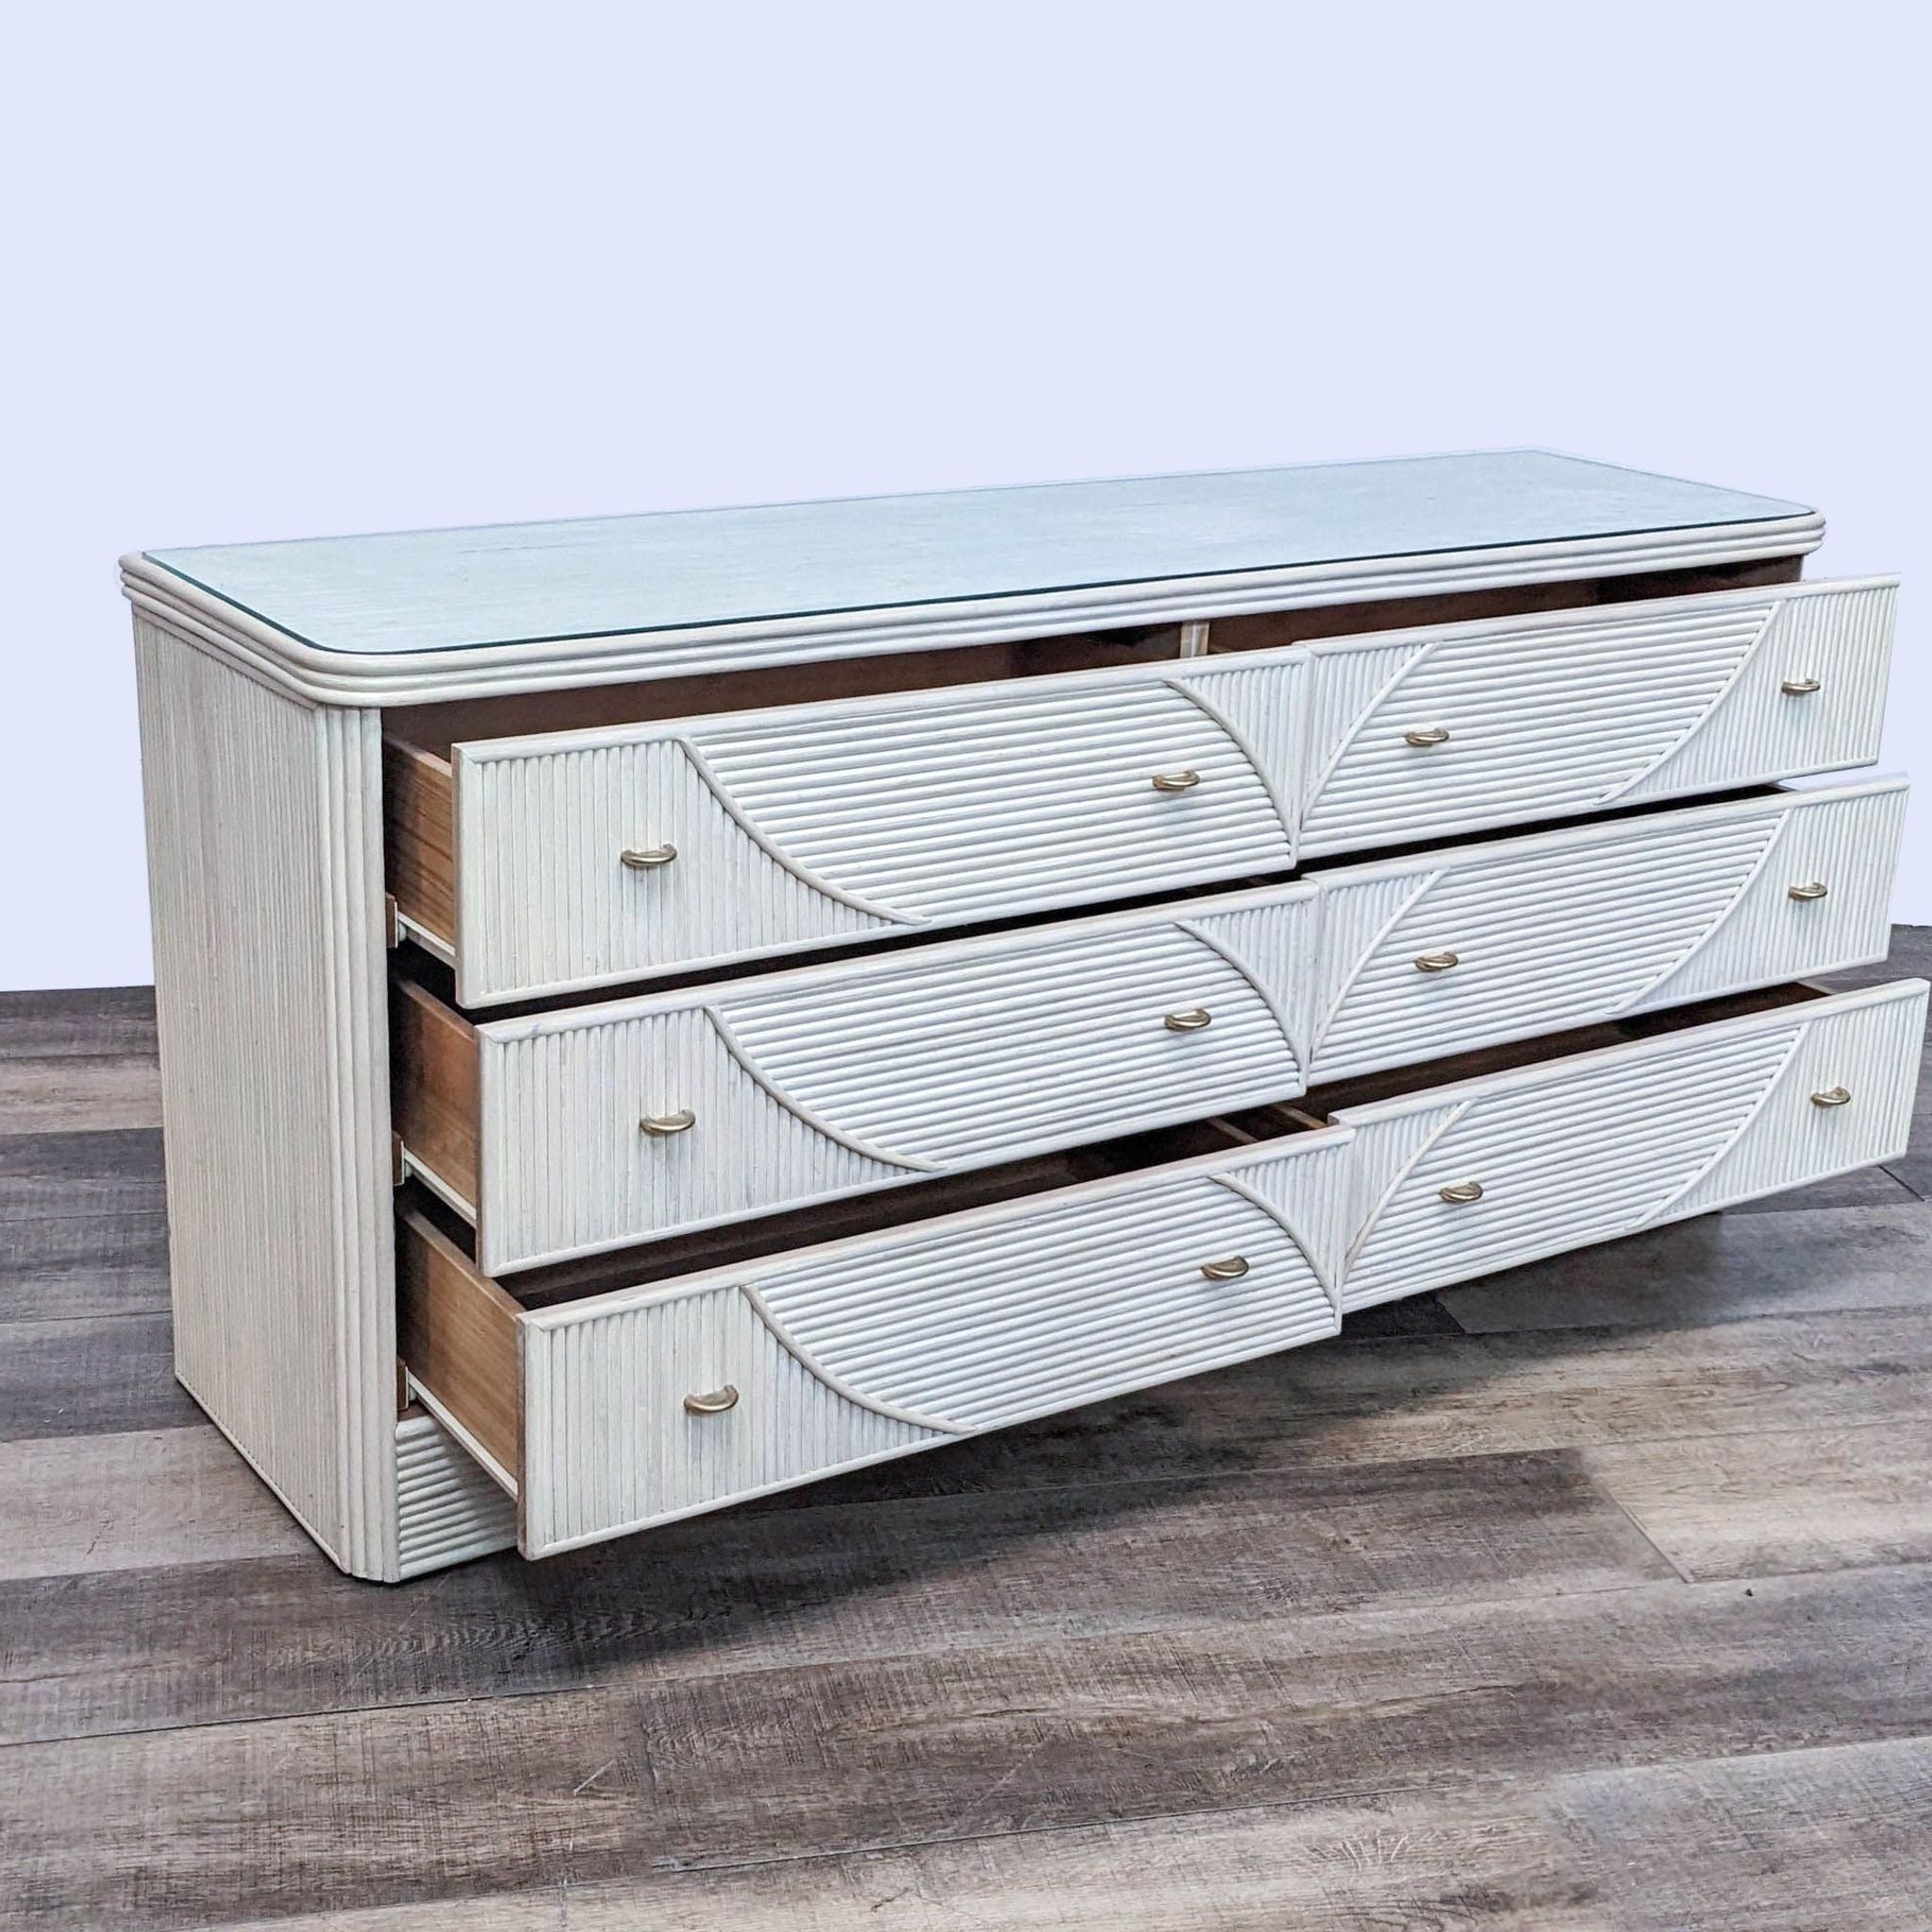 Late 20th-century 6-drawer pencil reed dresser with a coastal design and a protective glass cover.